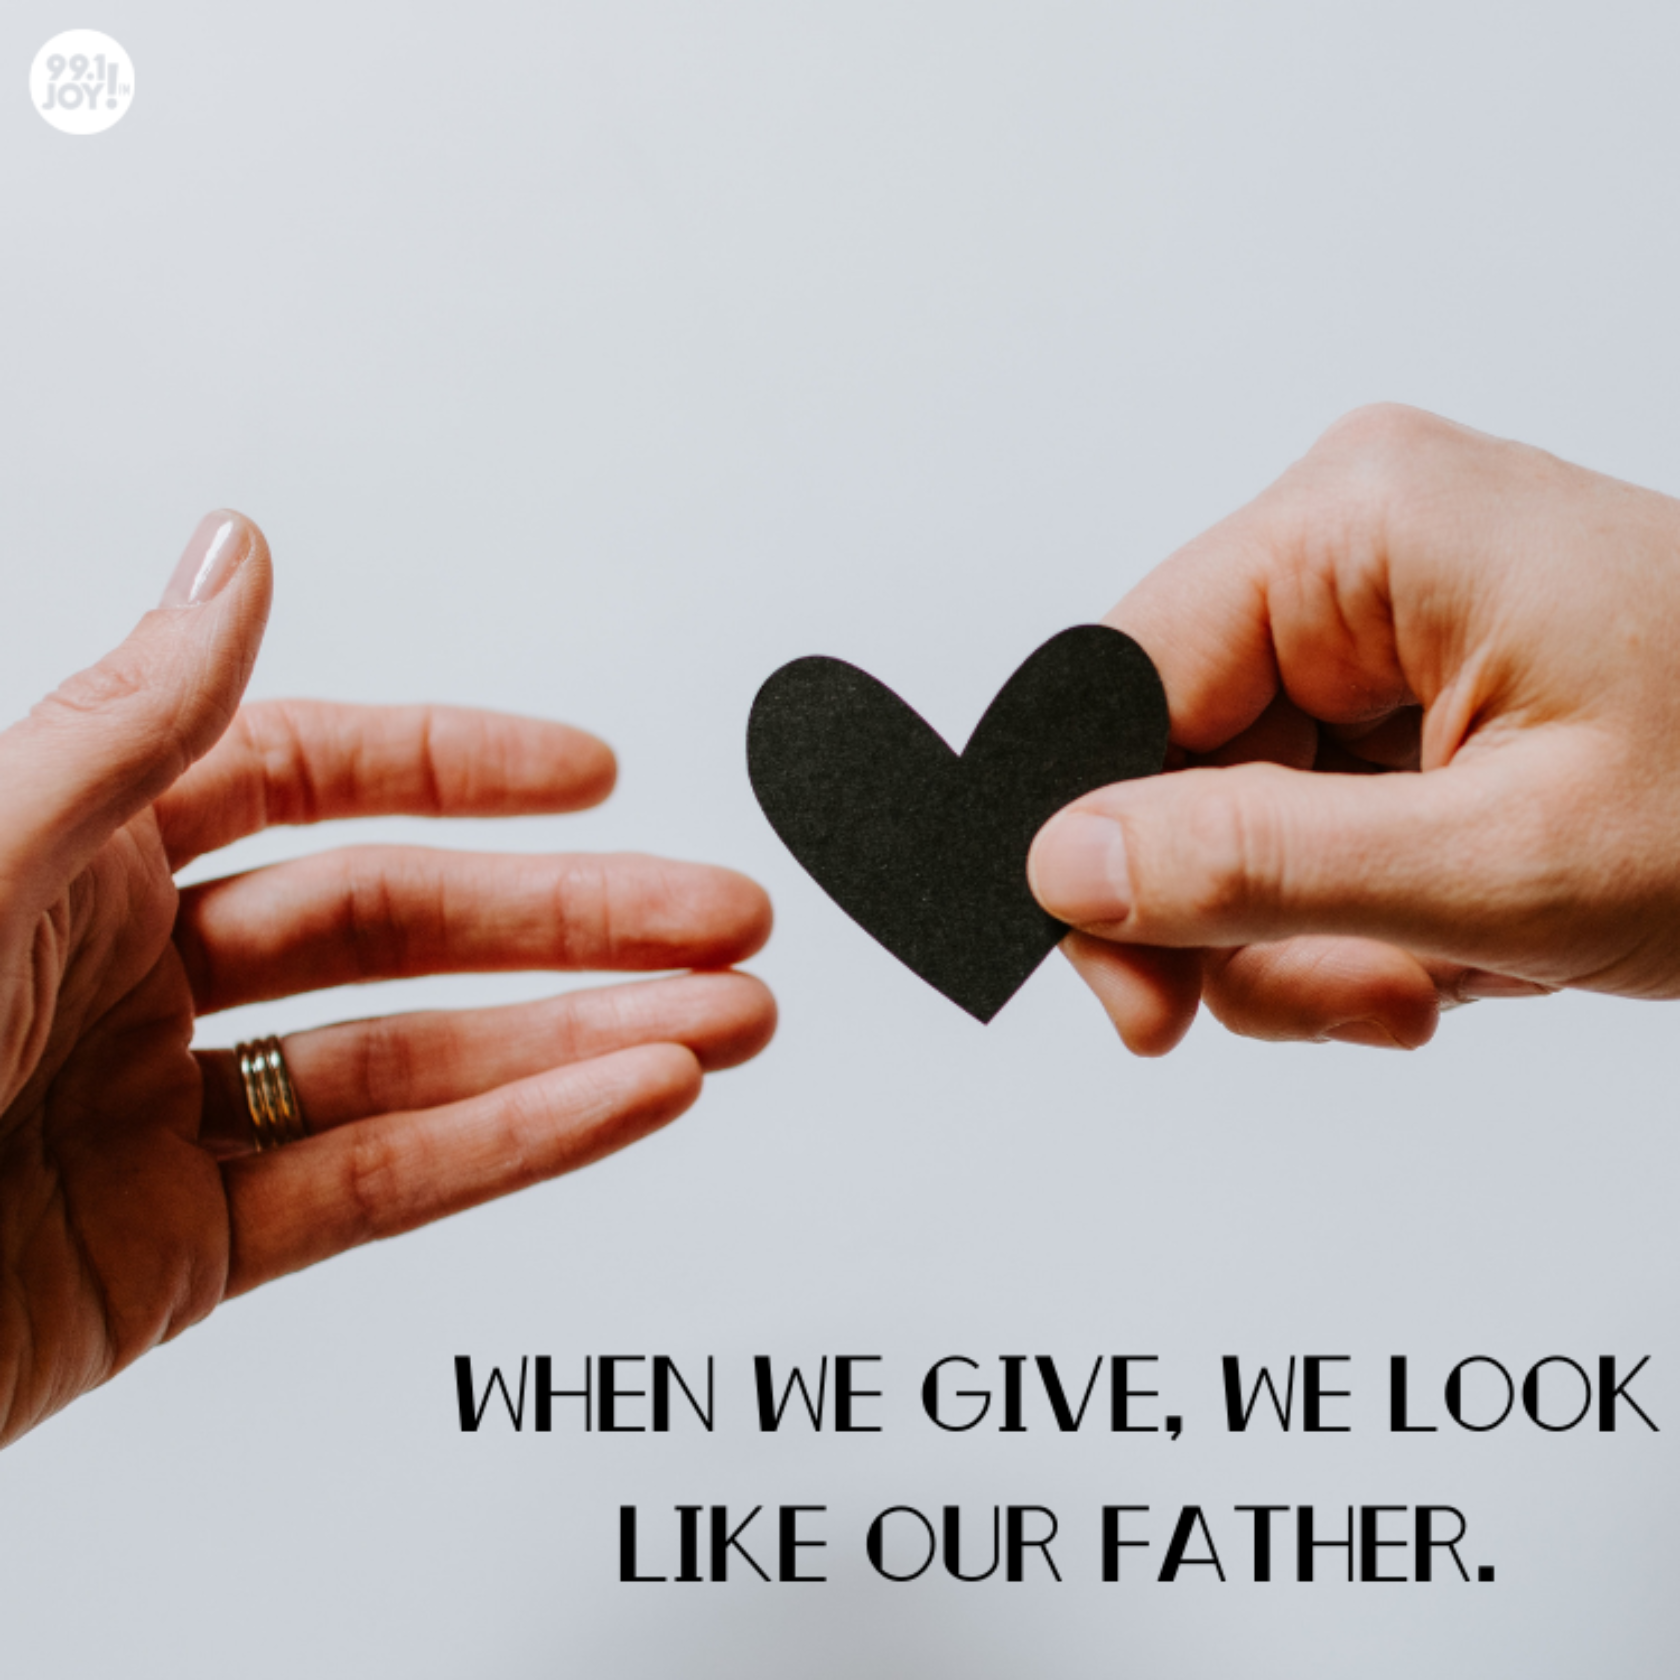 When We Give, We Look Like Our Father.